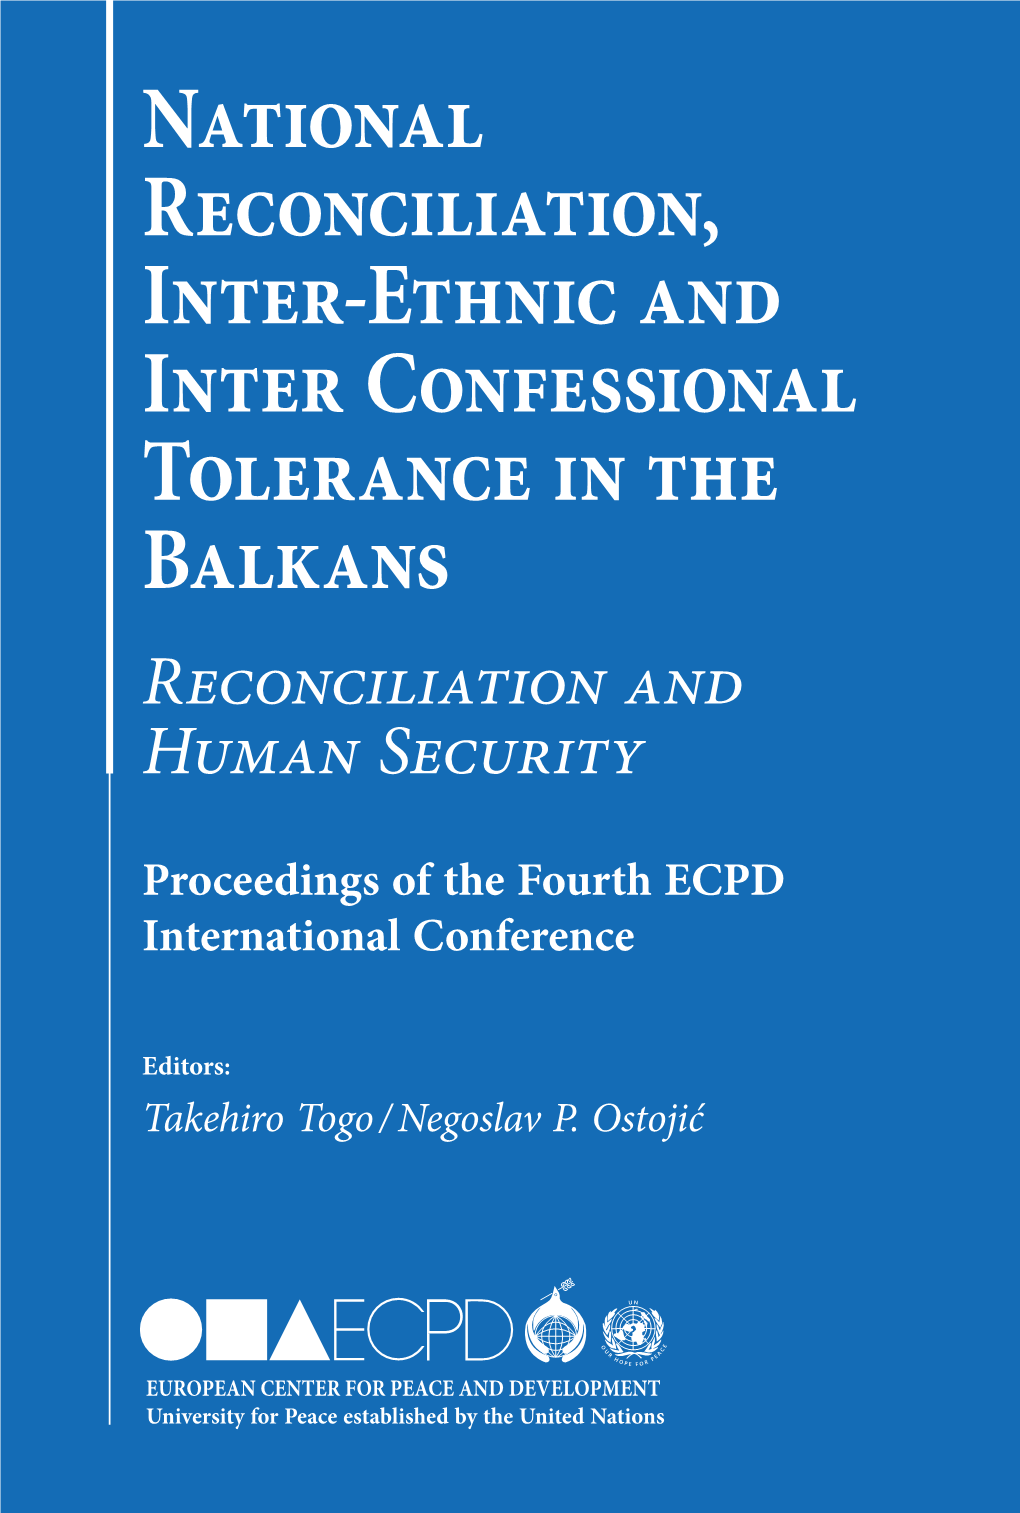 National Reconciliation, Inter-Ethnic and Inter Confessional Tolerance in the Balkans